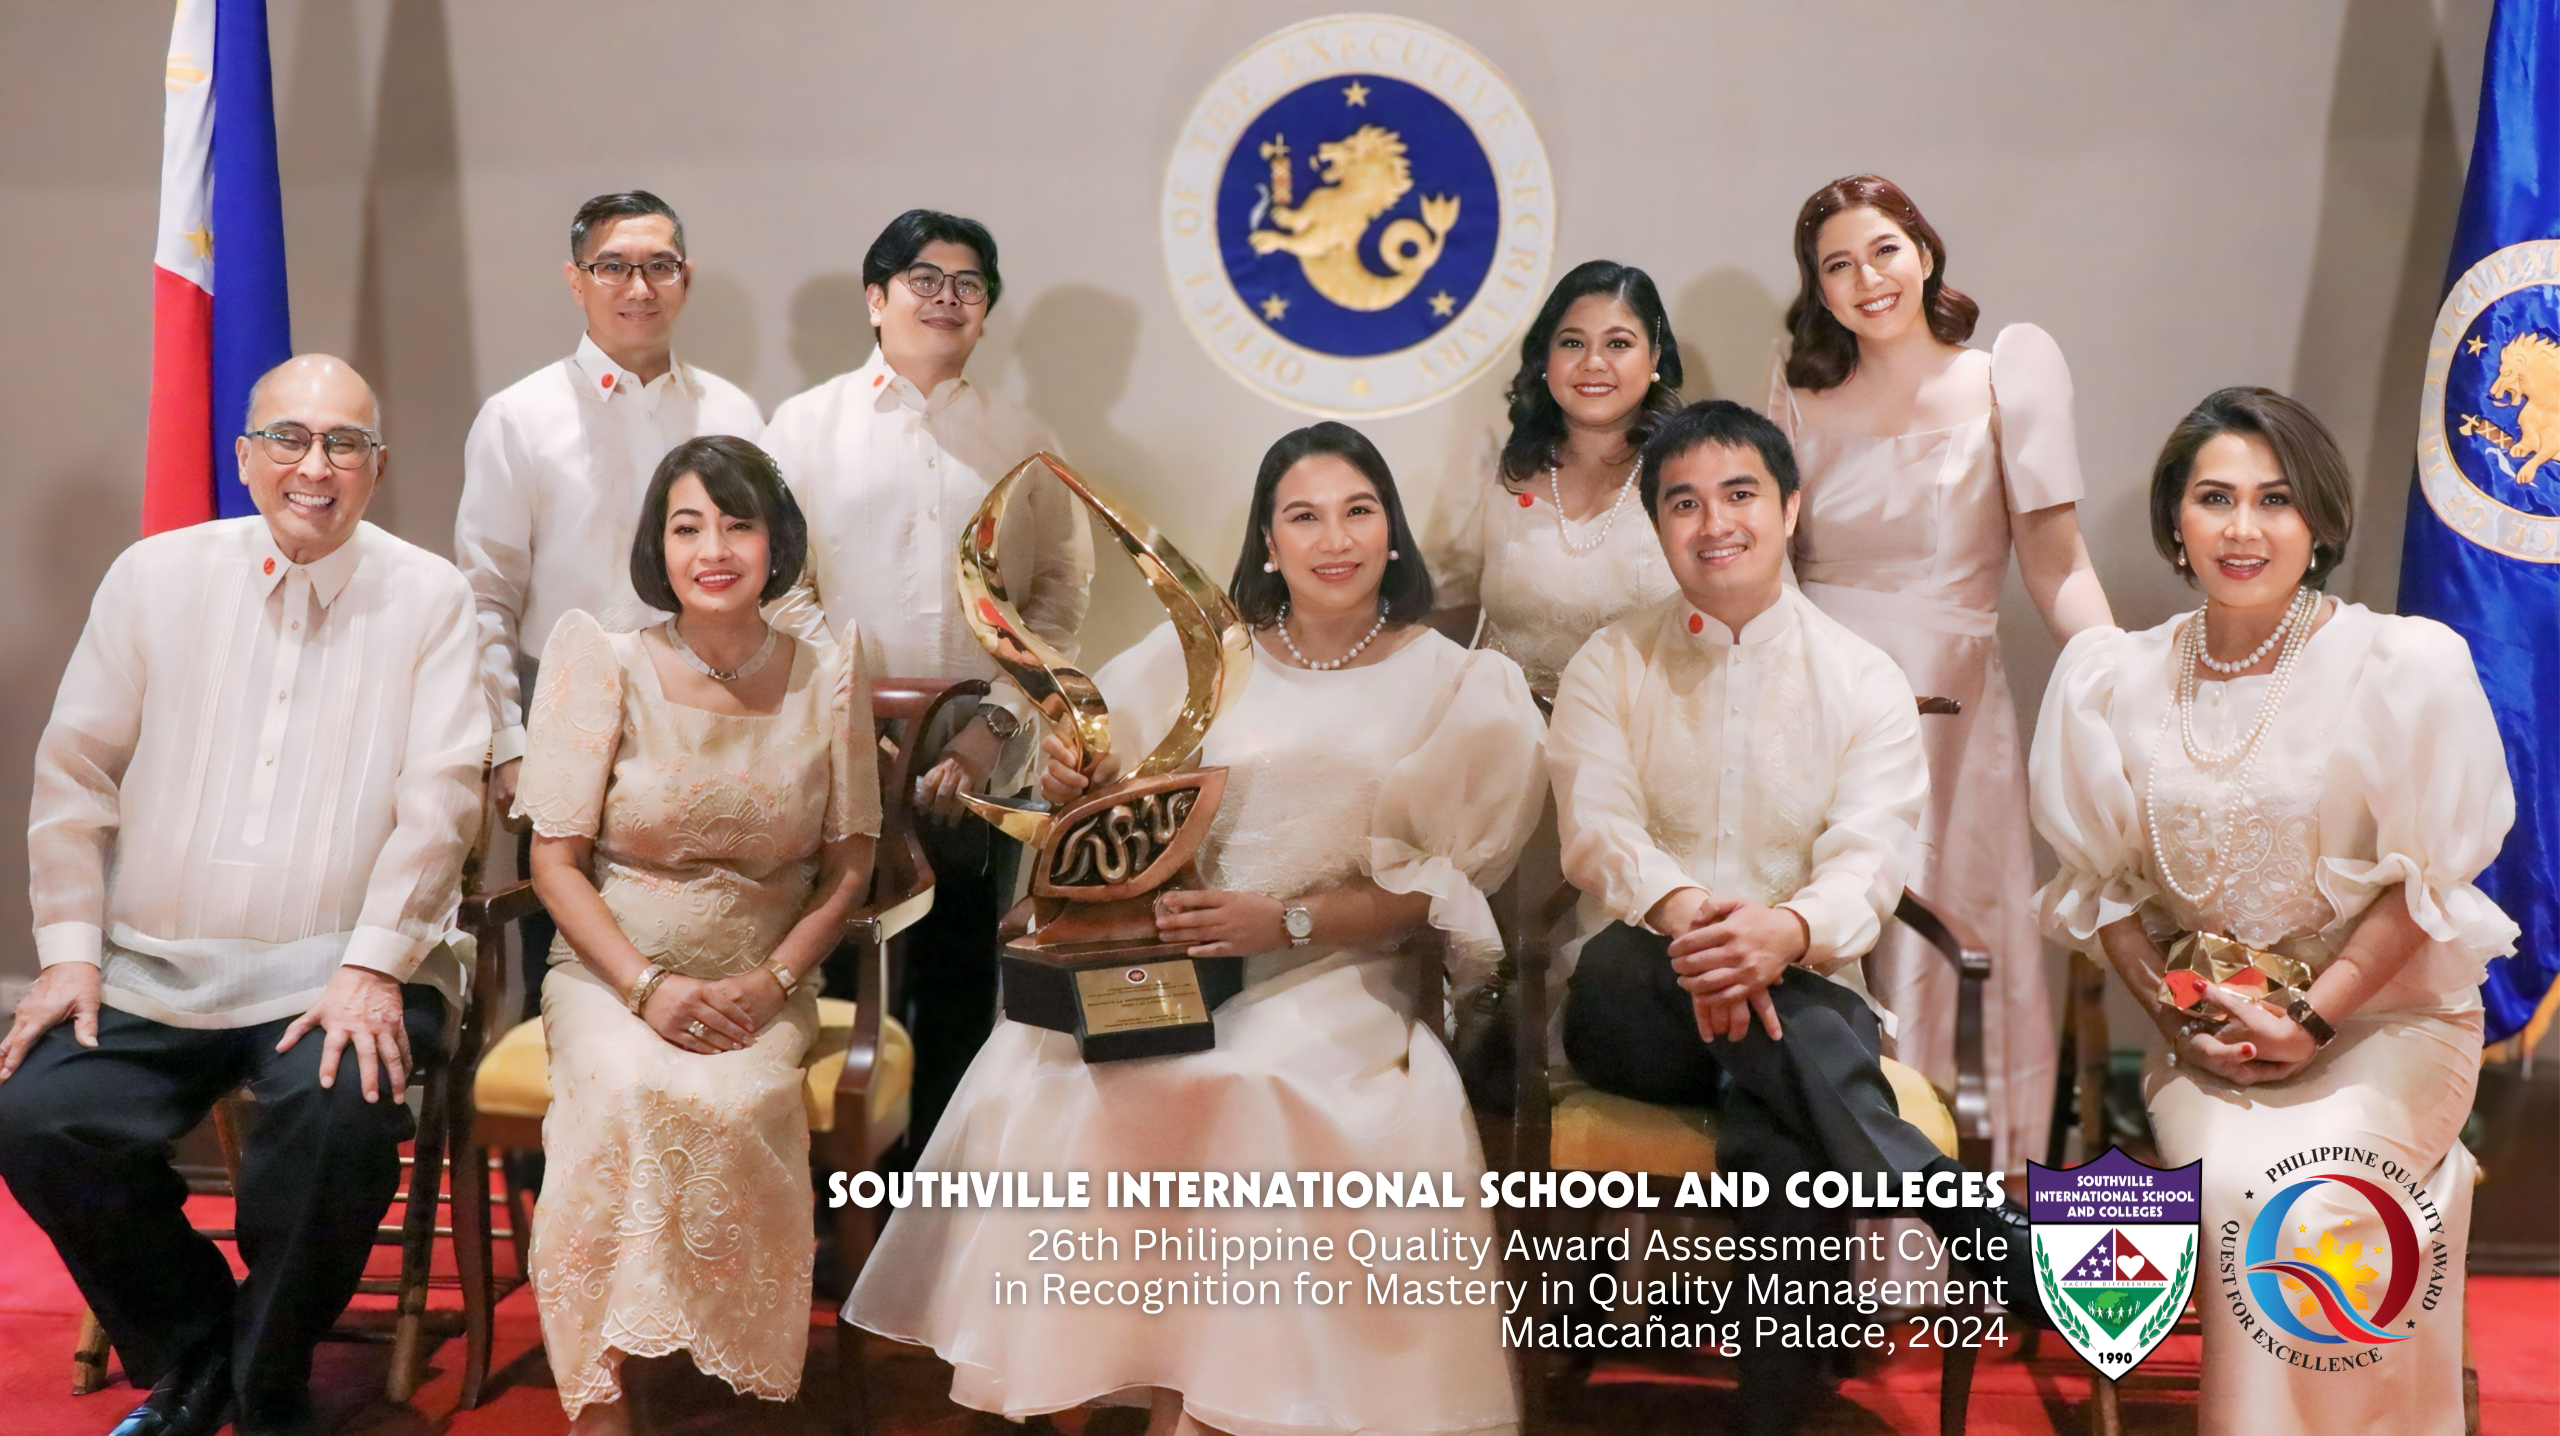 Southville International School and Colleges Achieves Recognition for Mastery in Quality Management at the 26th Philippine Quality Award